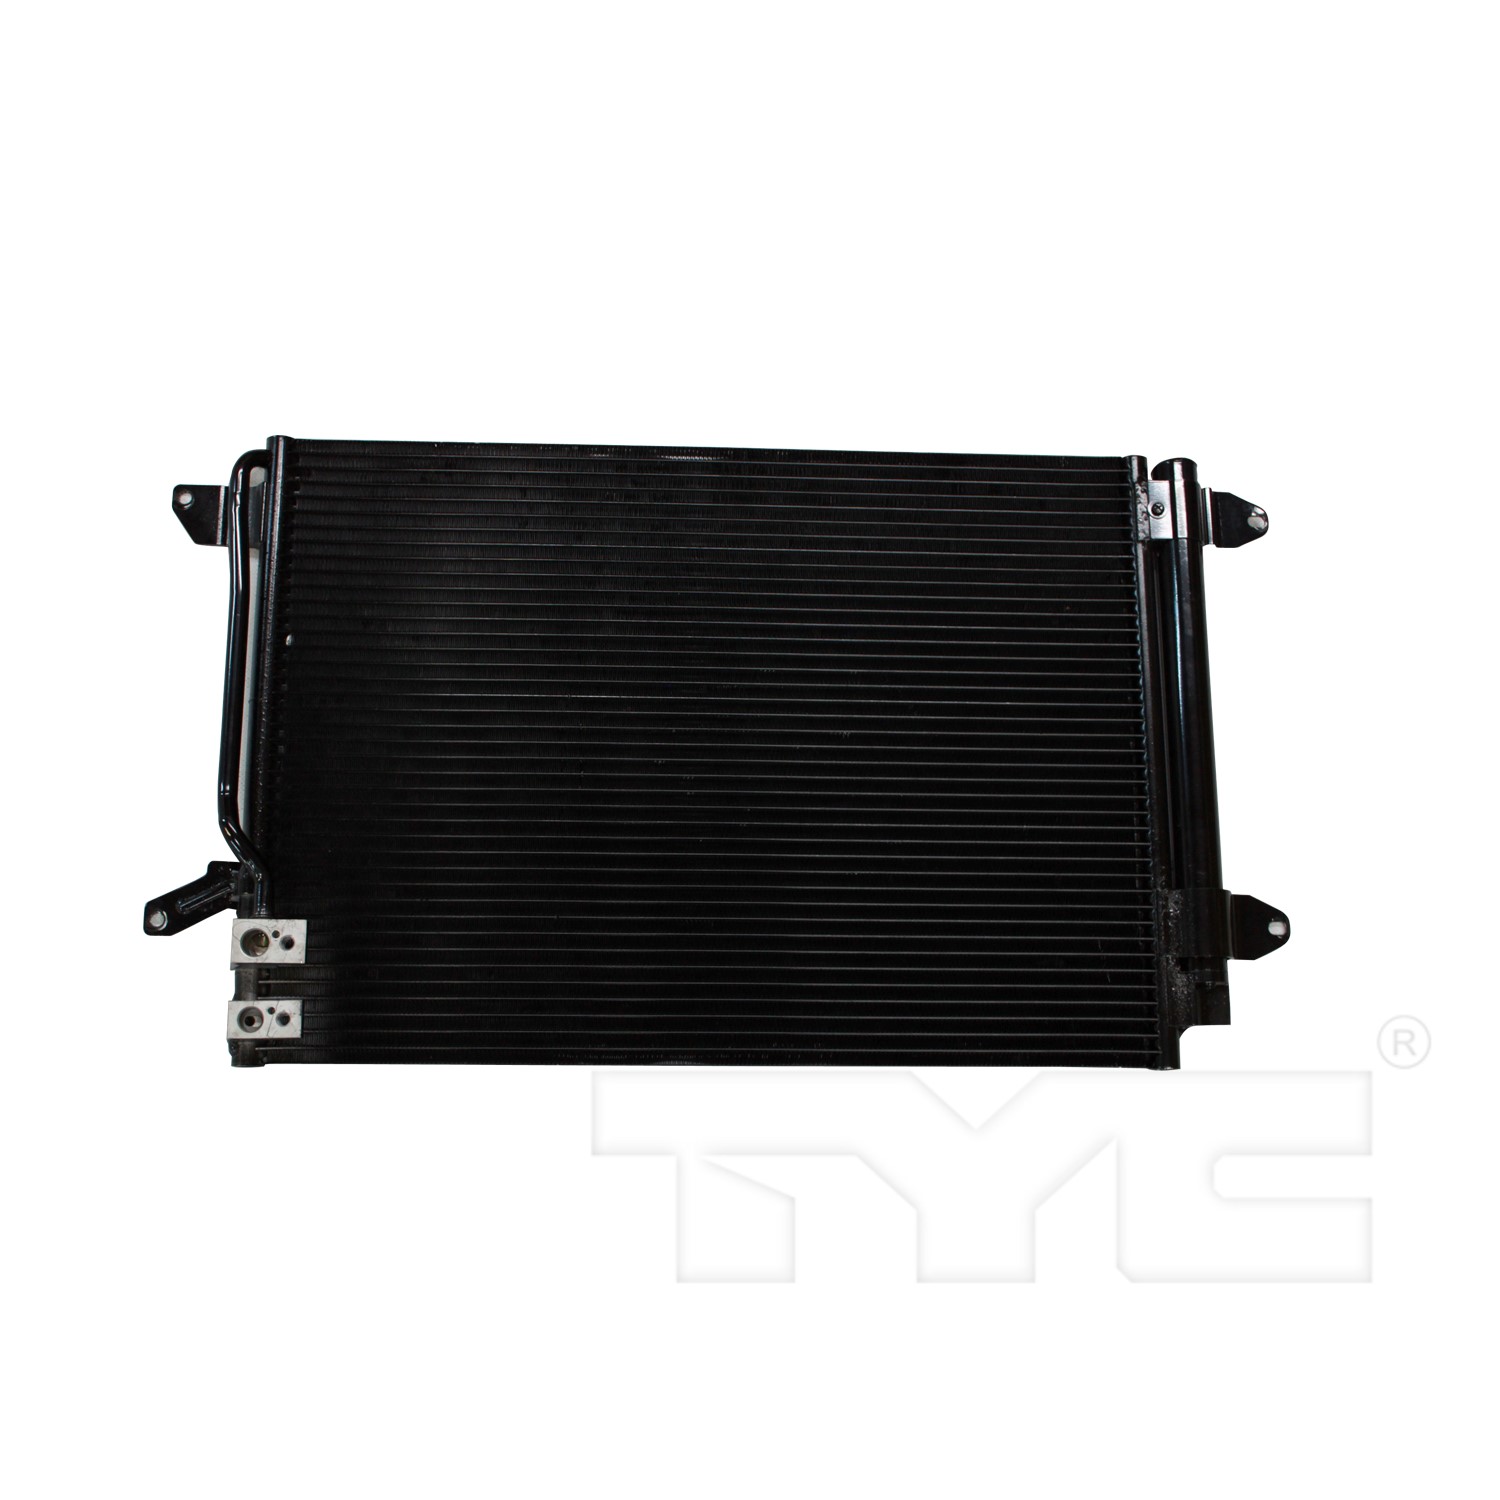 Aftermarket AC CONDENSERS for VOLKSWAGEN - BEETLE, BEETLE,12-15,Air conditioning condenser